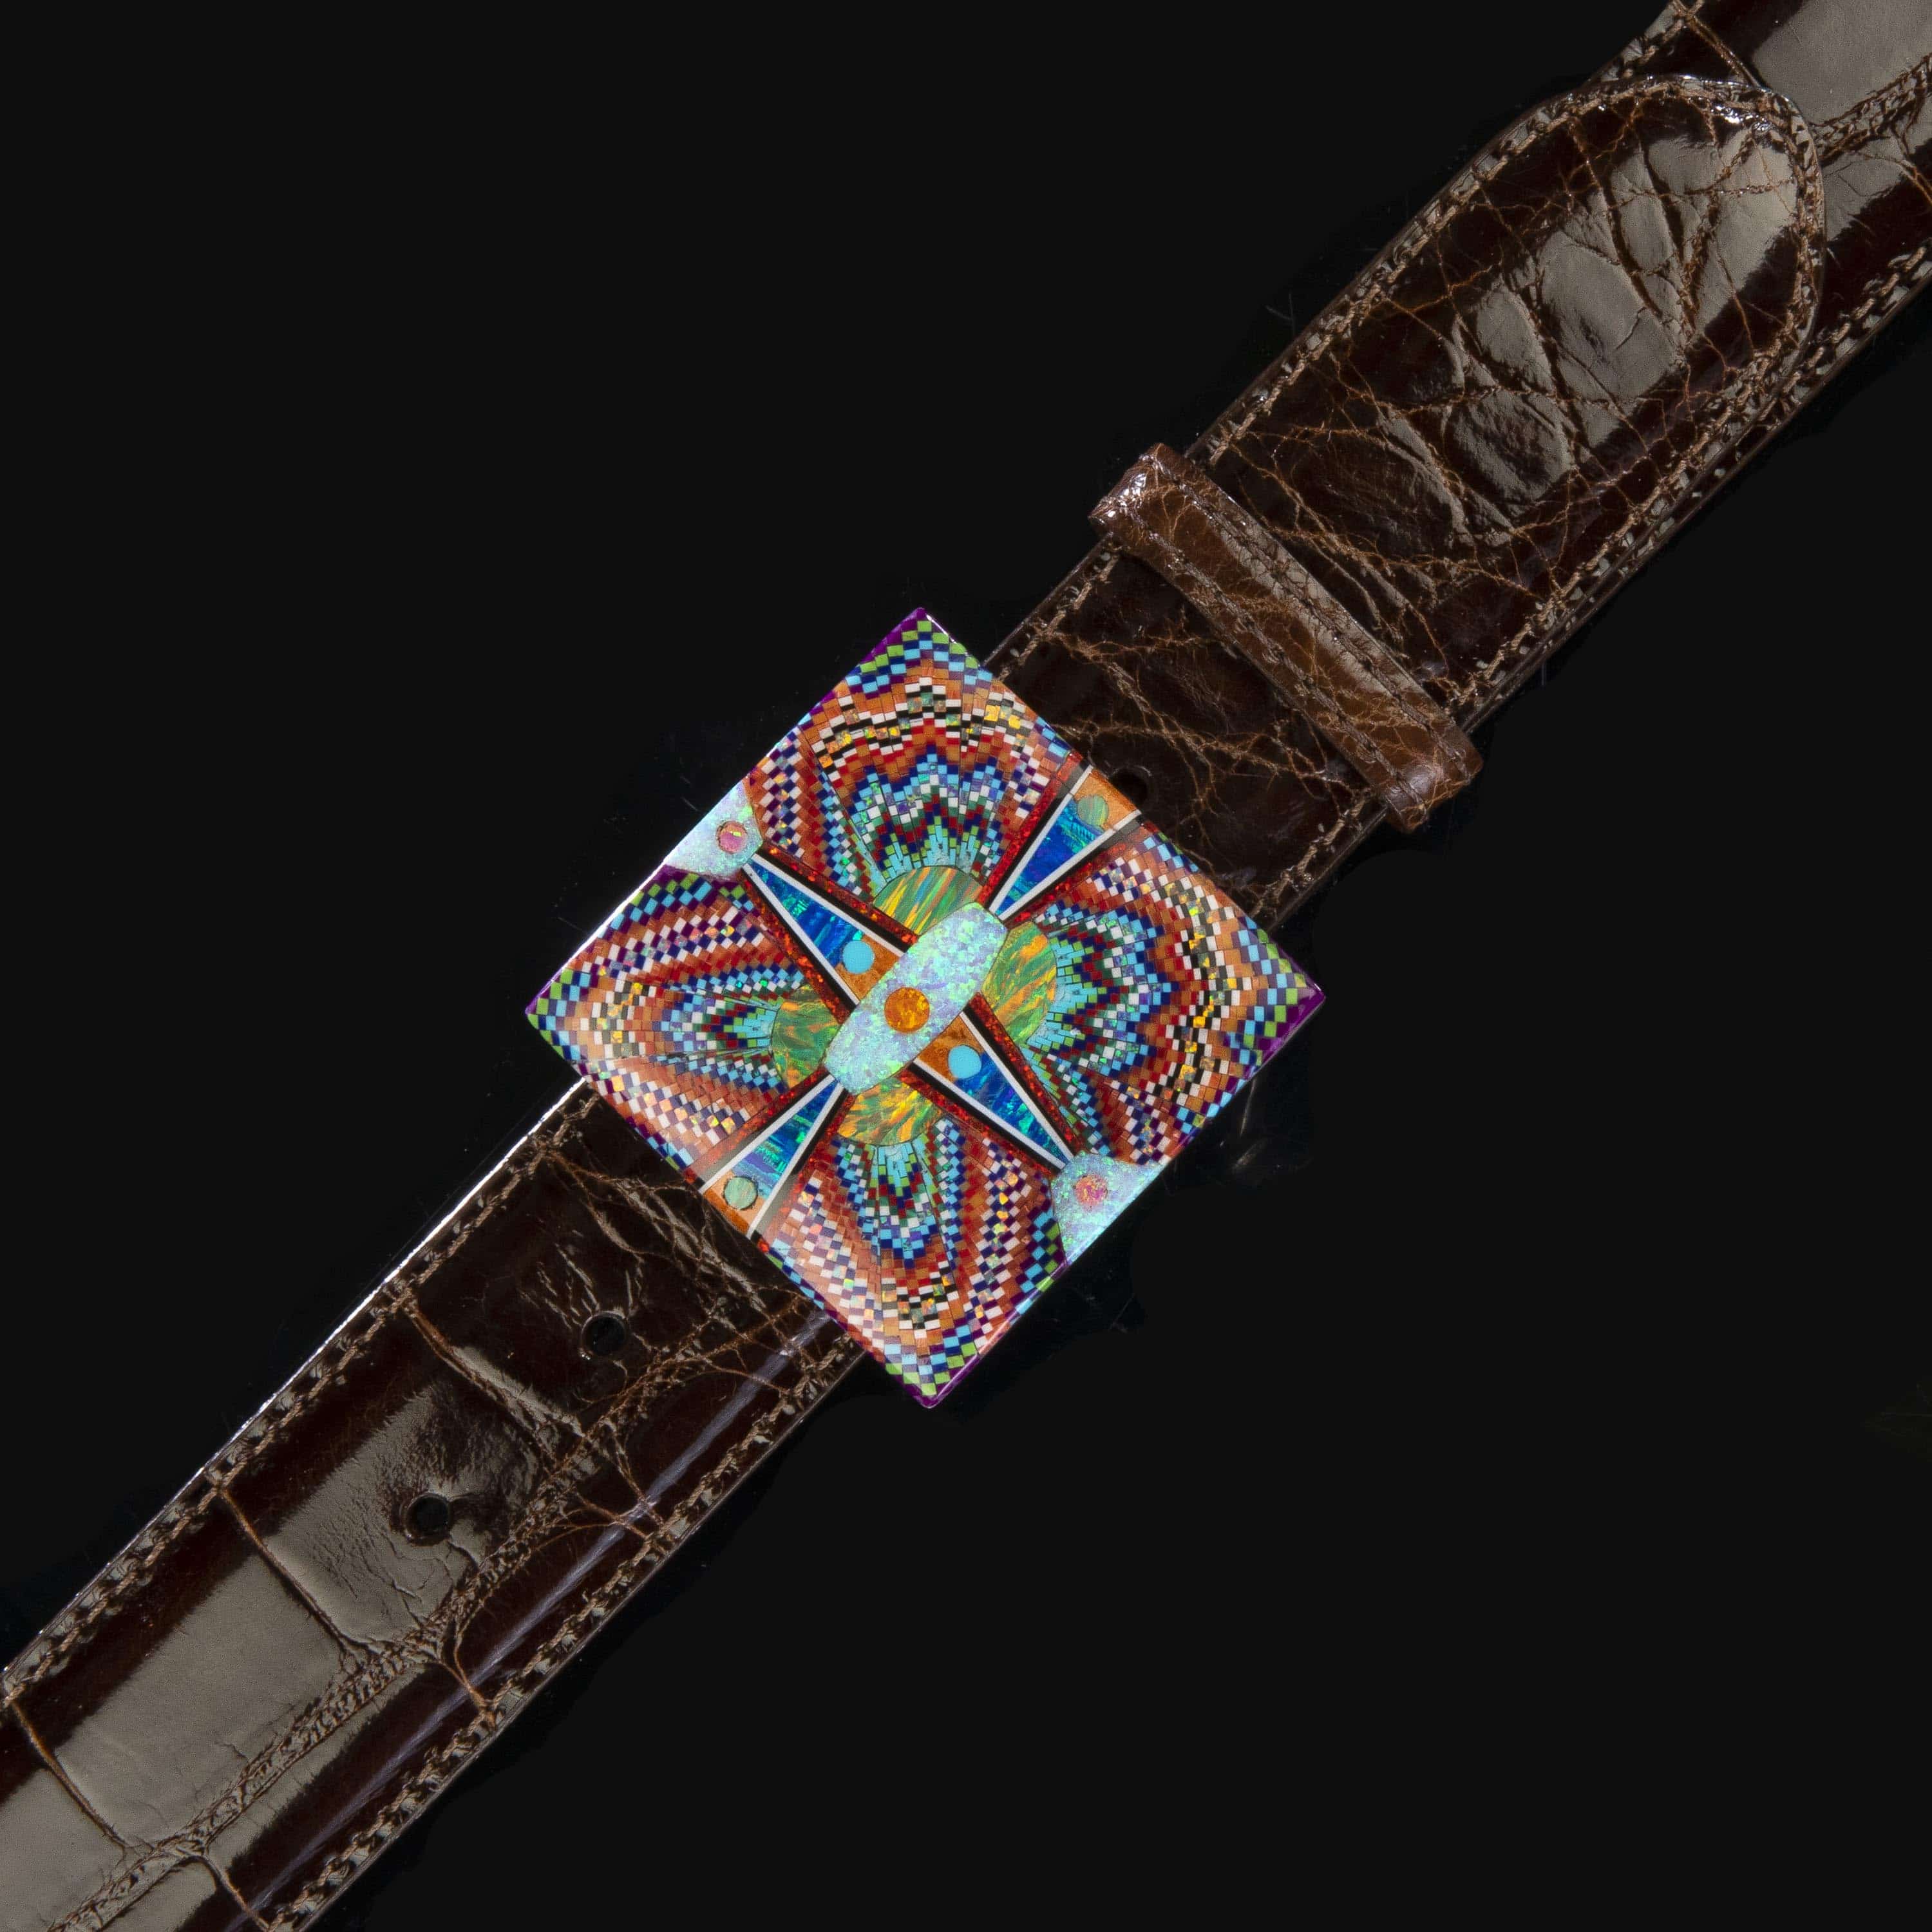 KALIFANO Southwest Silver Jewelry Multi Gem Opal Micro Inlay with Genuine Turquoise Handmade 925 Sterling Silver Square Belt Buckle AKBB1200.006